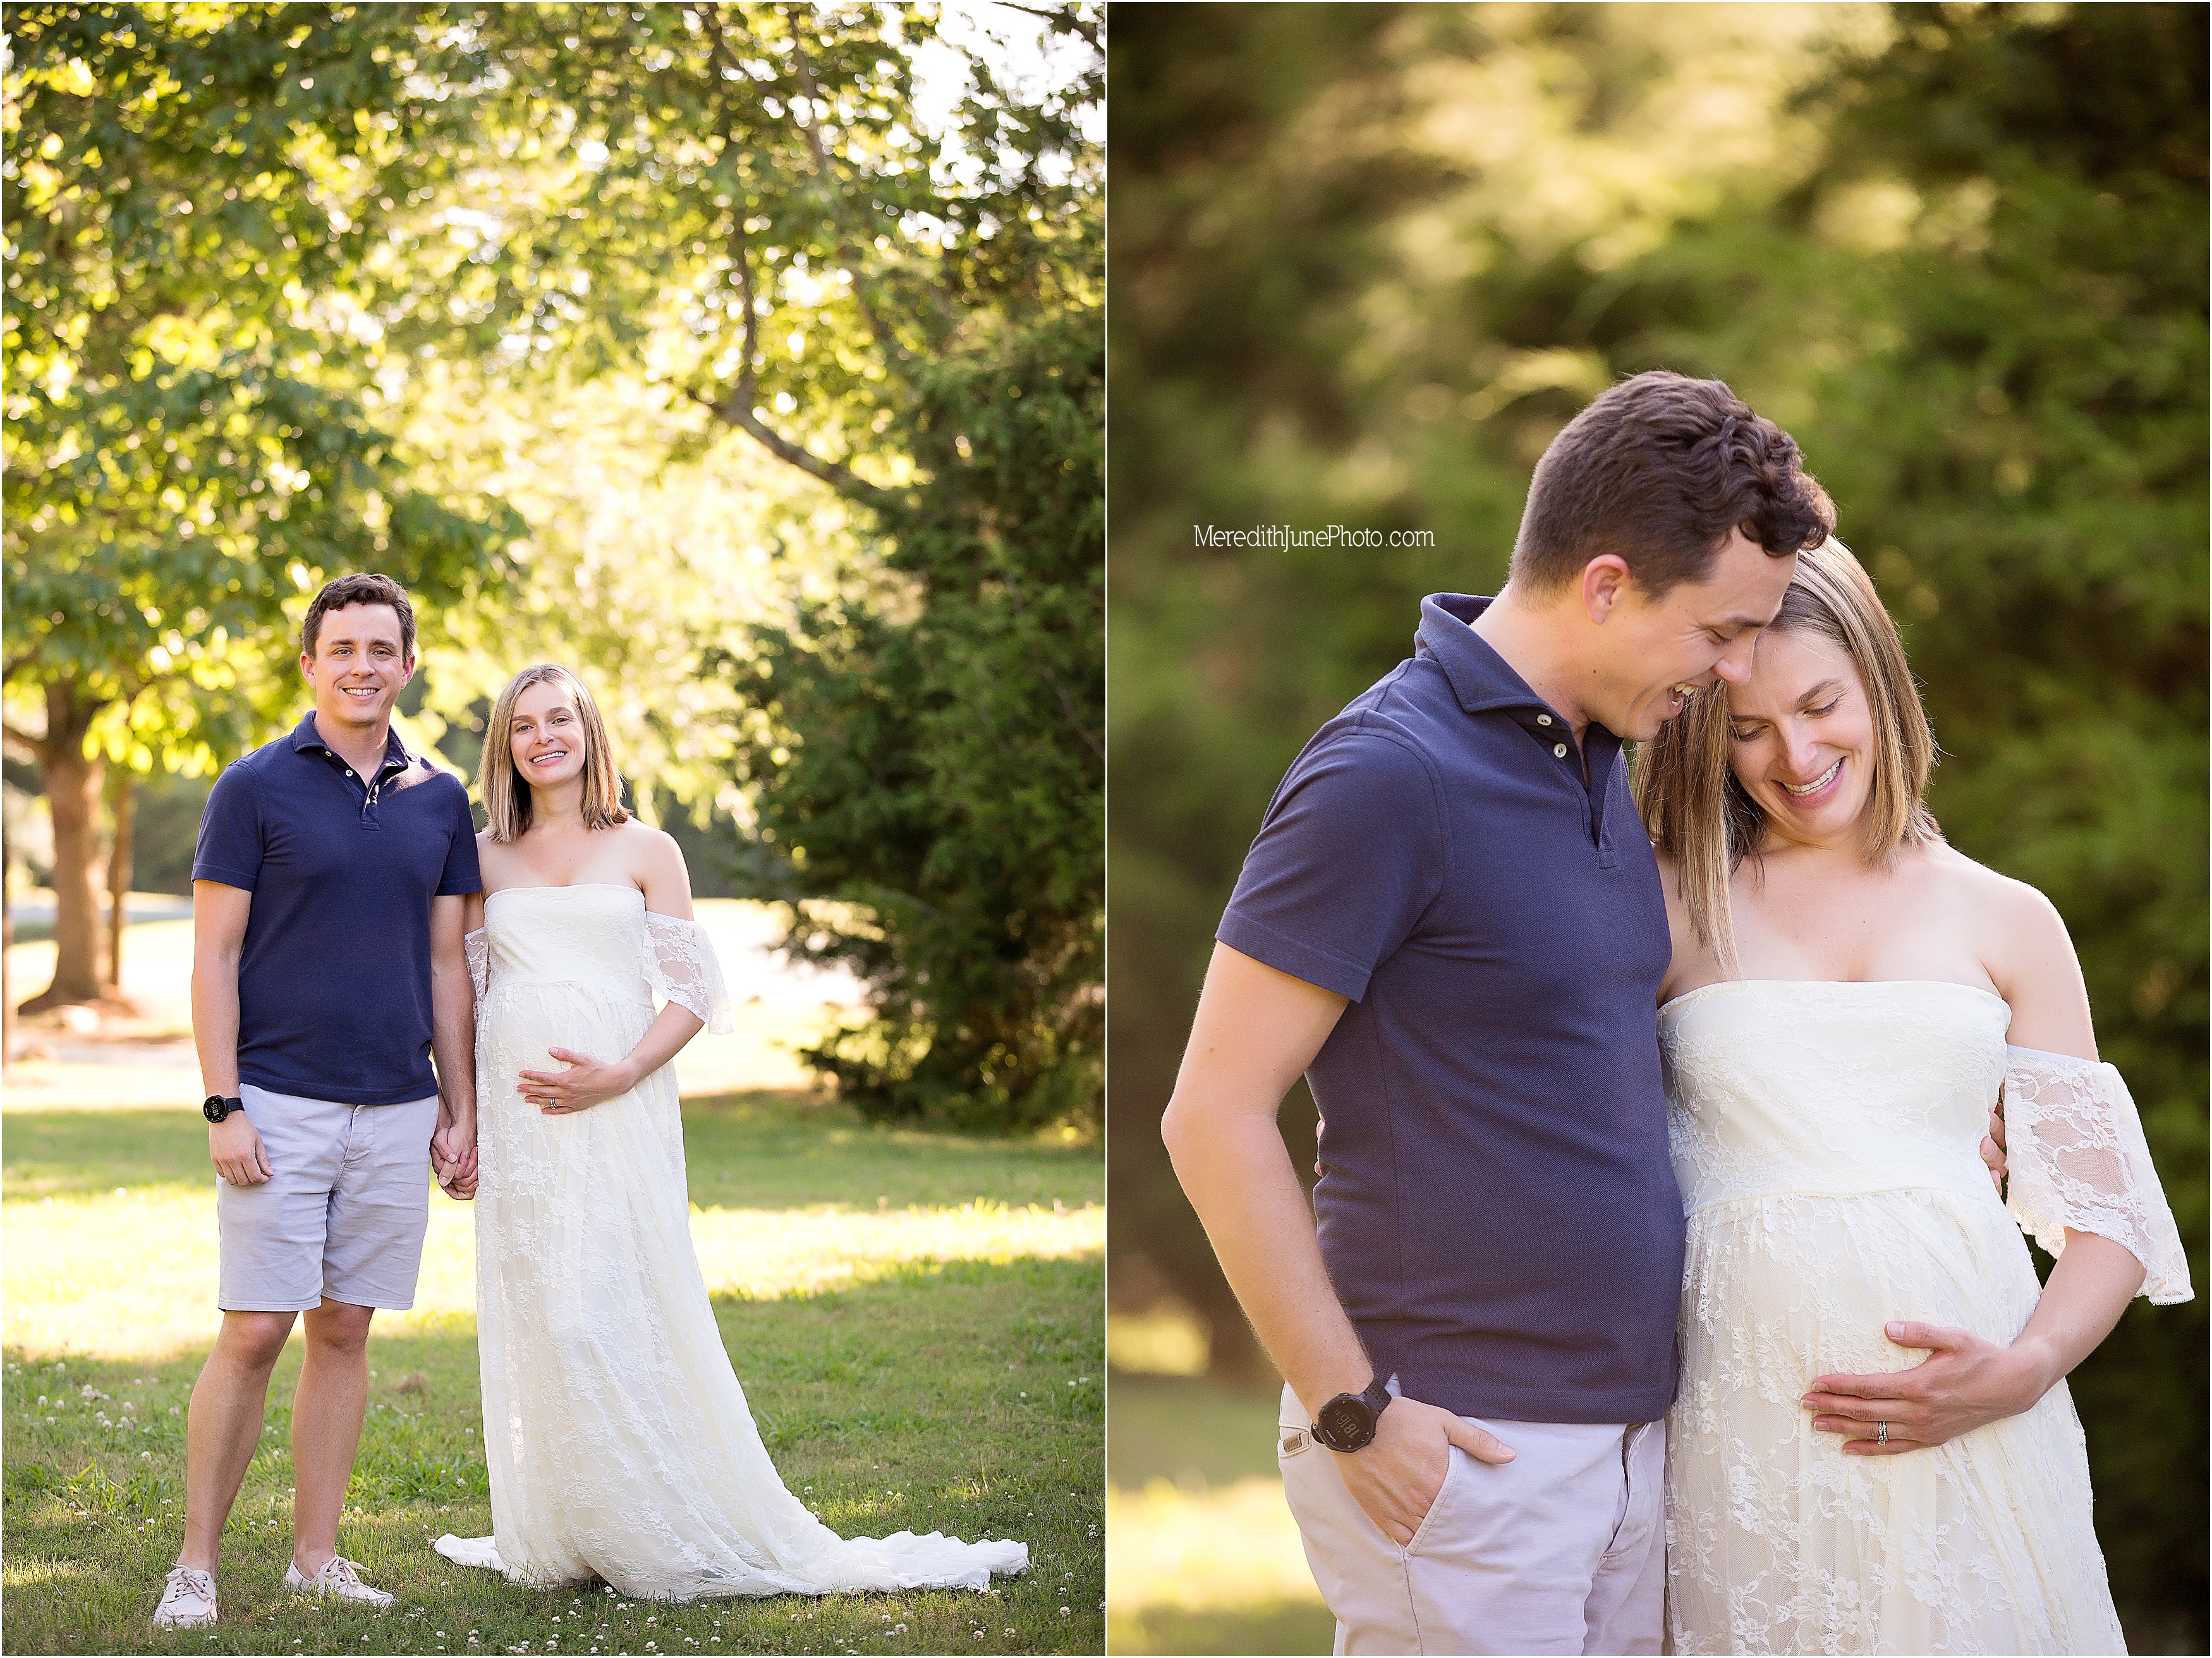 Beautiful couples maternity session in the park 